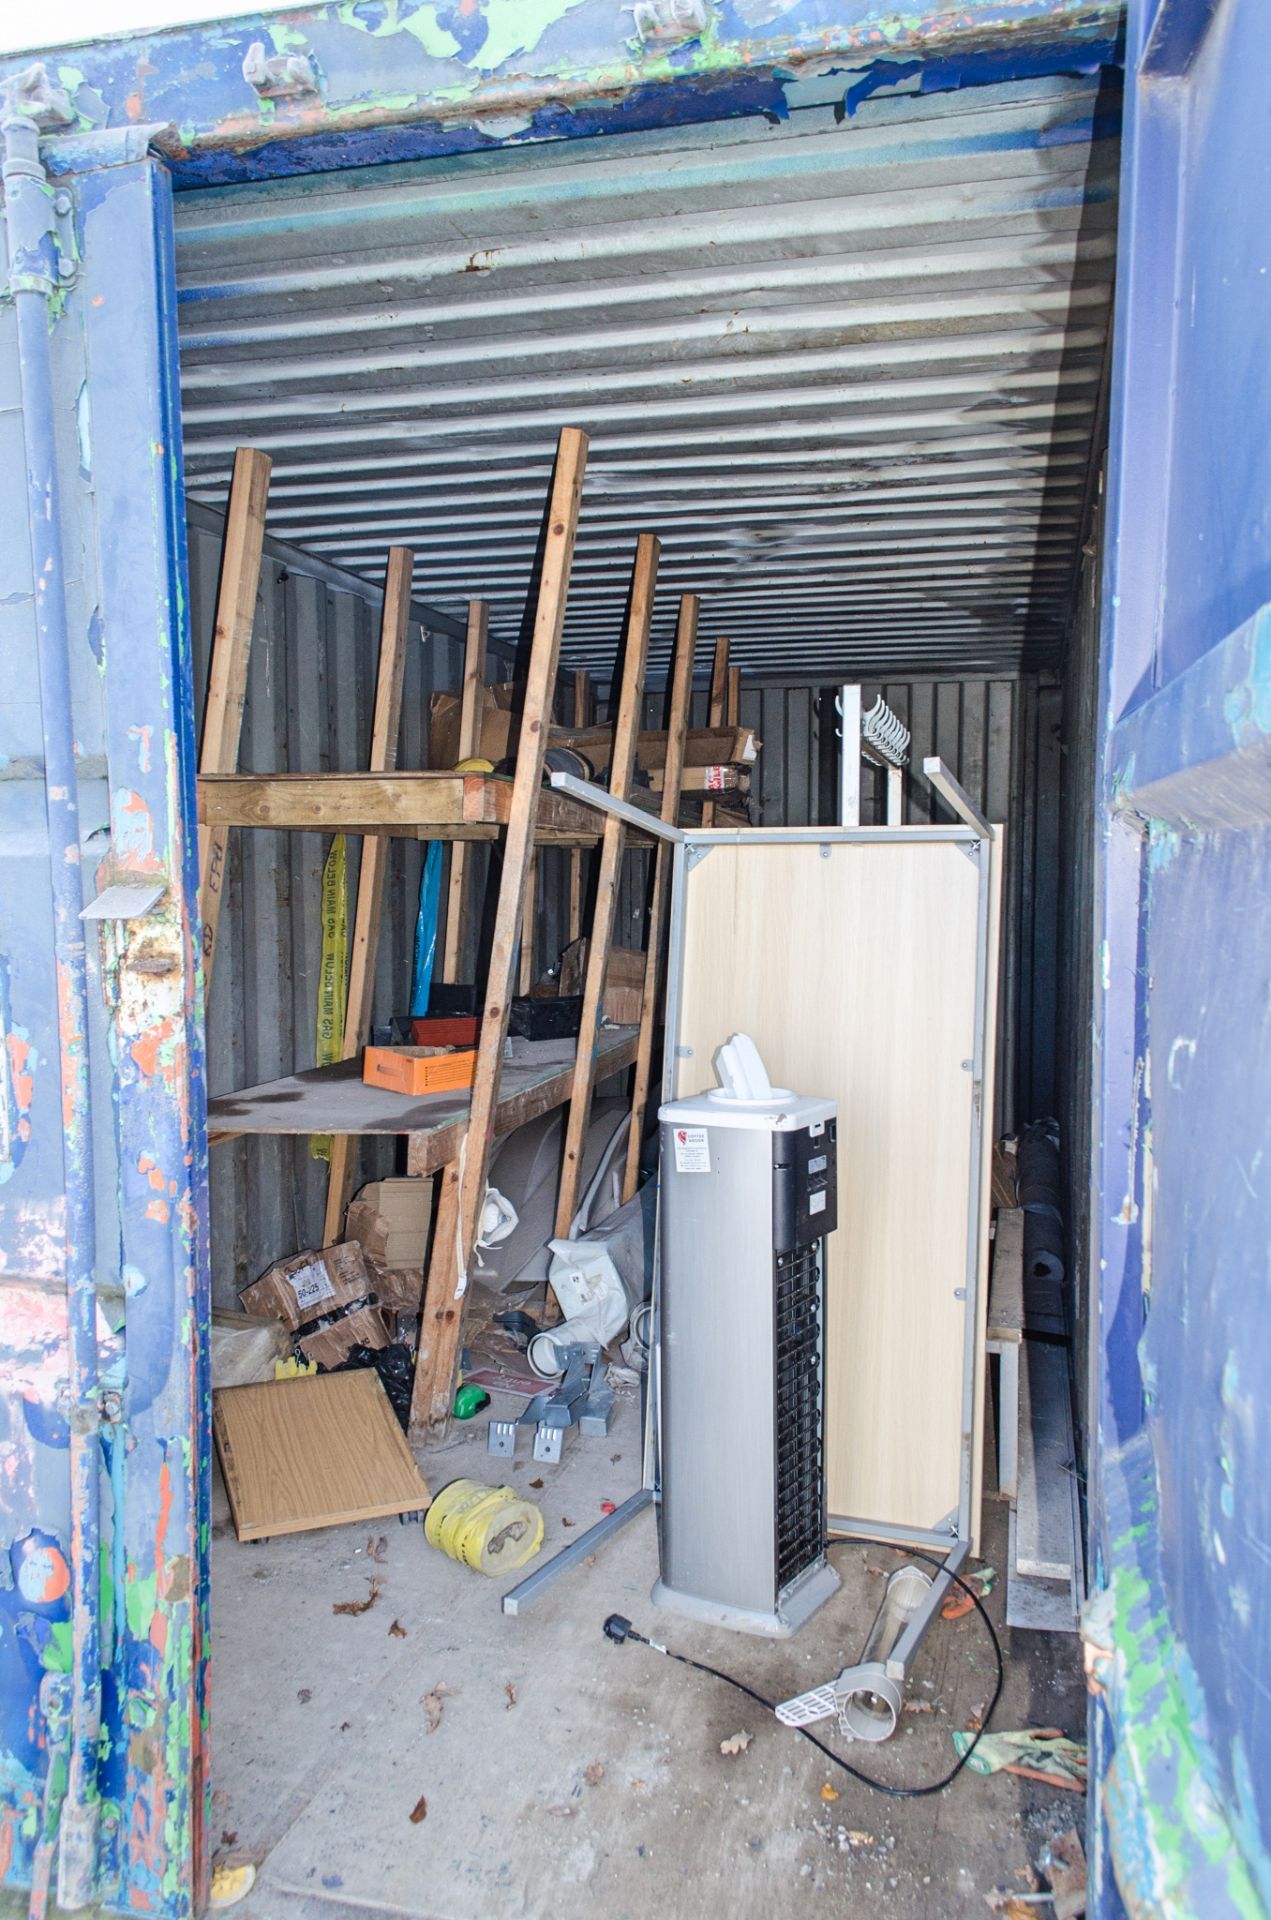 20 ft x 8 ft steel shipping container - Image 5 of 6